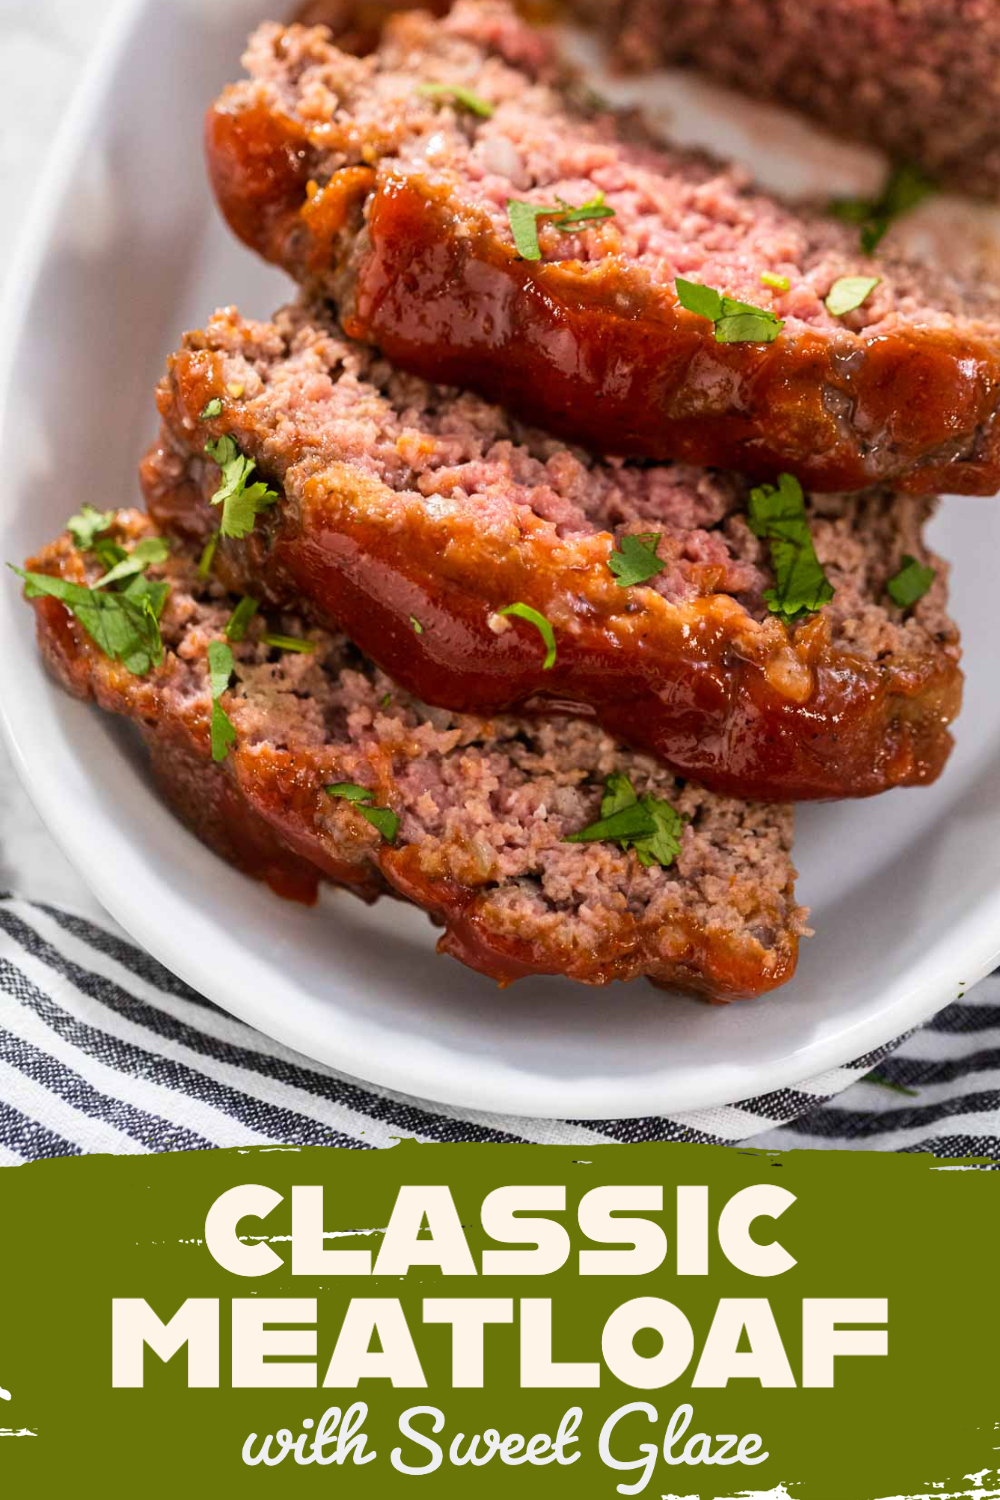 Classic Meatloaf with Sweet Glaze